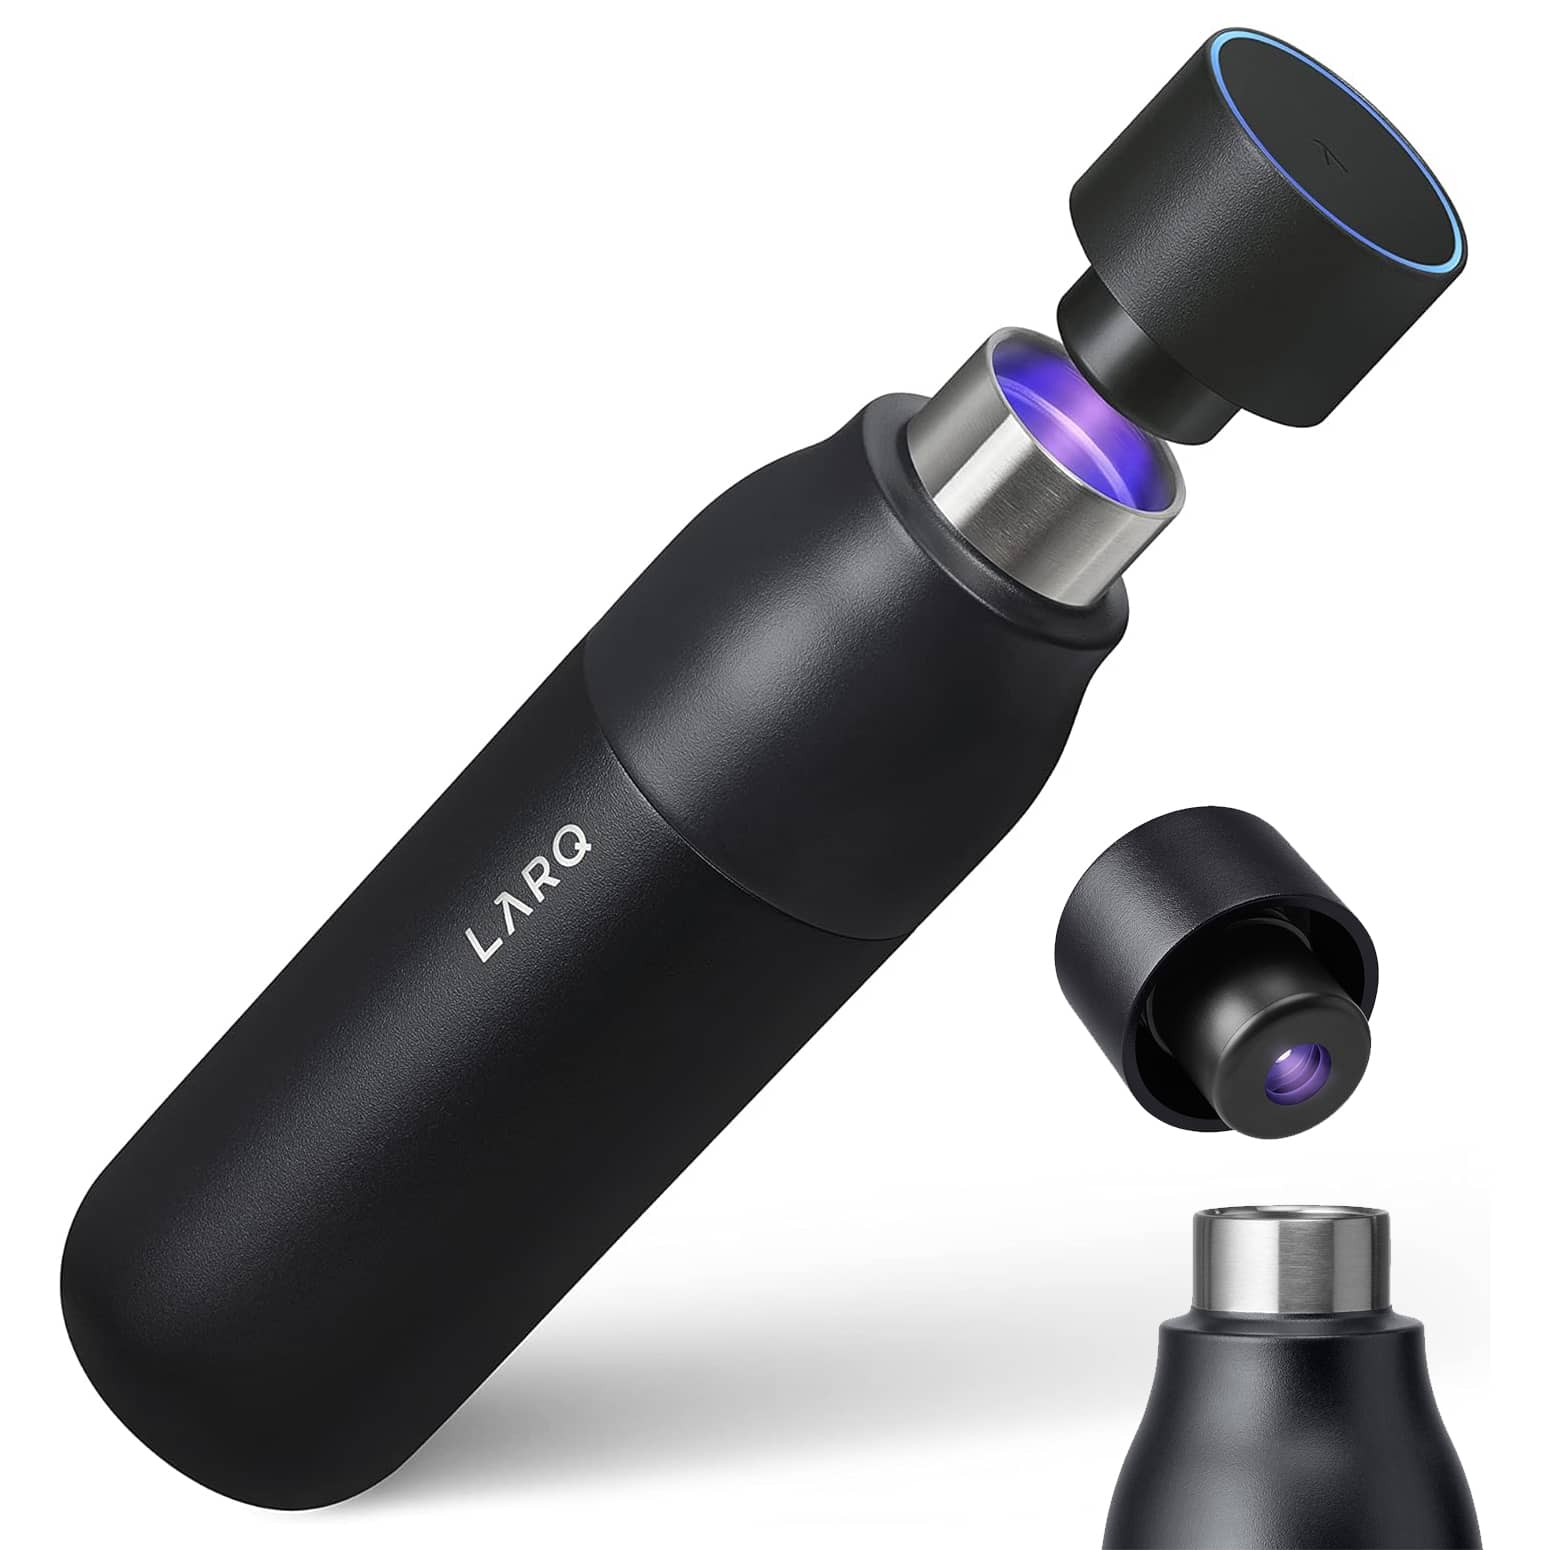 LARQ PureVis - Self-Cleaning Water Bottle with UV-C Water Sanitizer